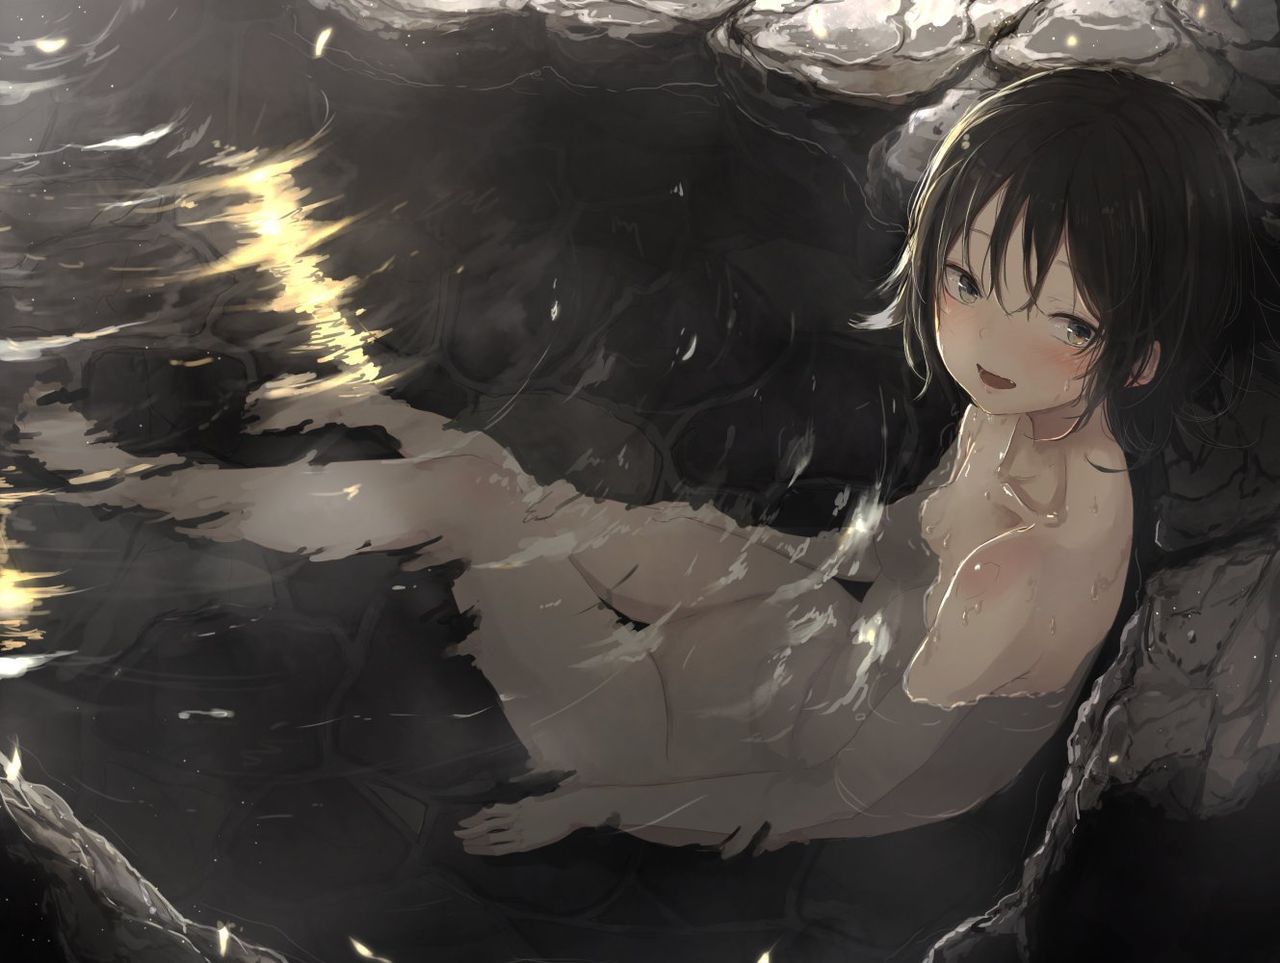 Secondary fetish image of bath and hot spring. 2